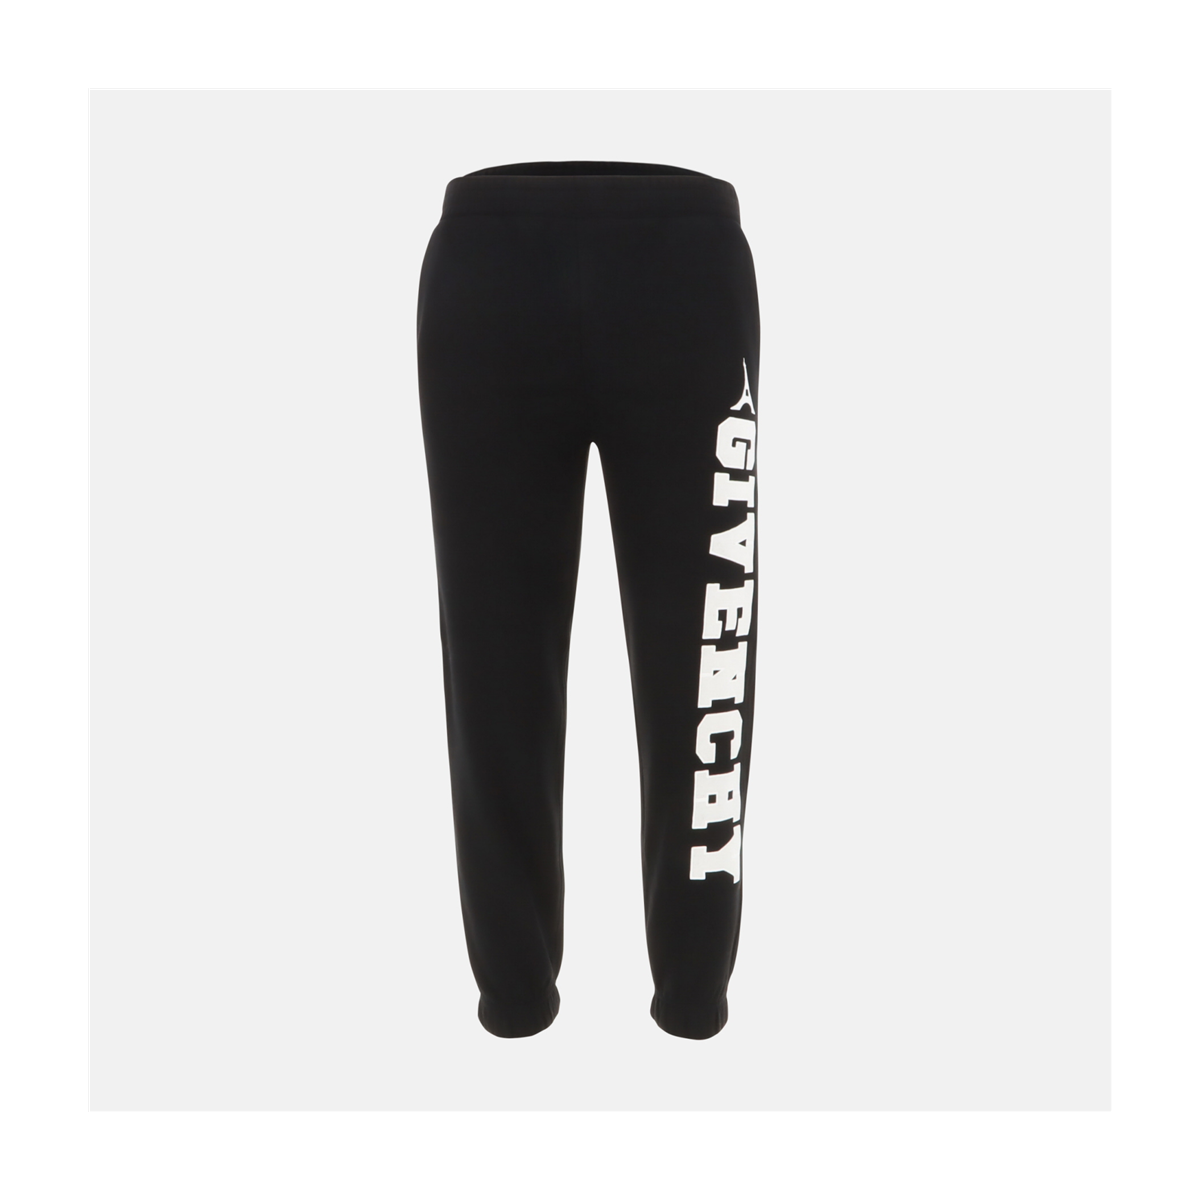 https://drake-store-shop.ch/22379-full_default/givenchy-joggers.jpg